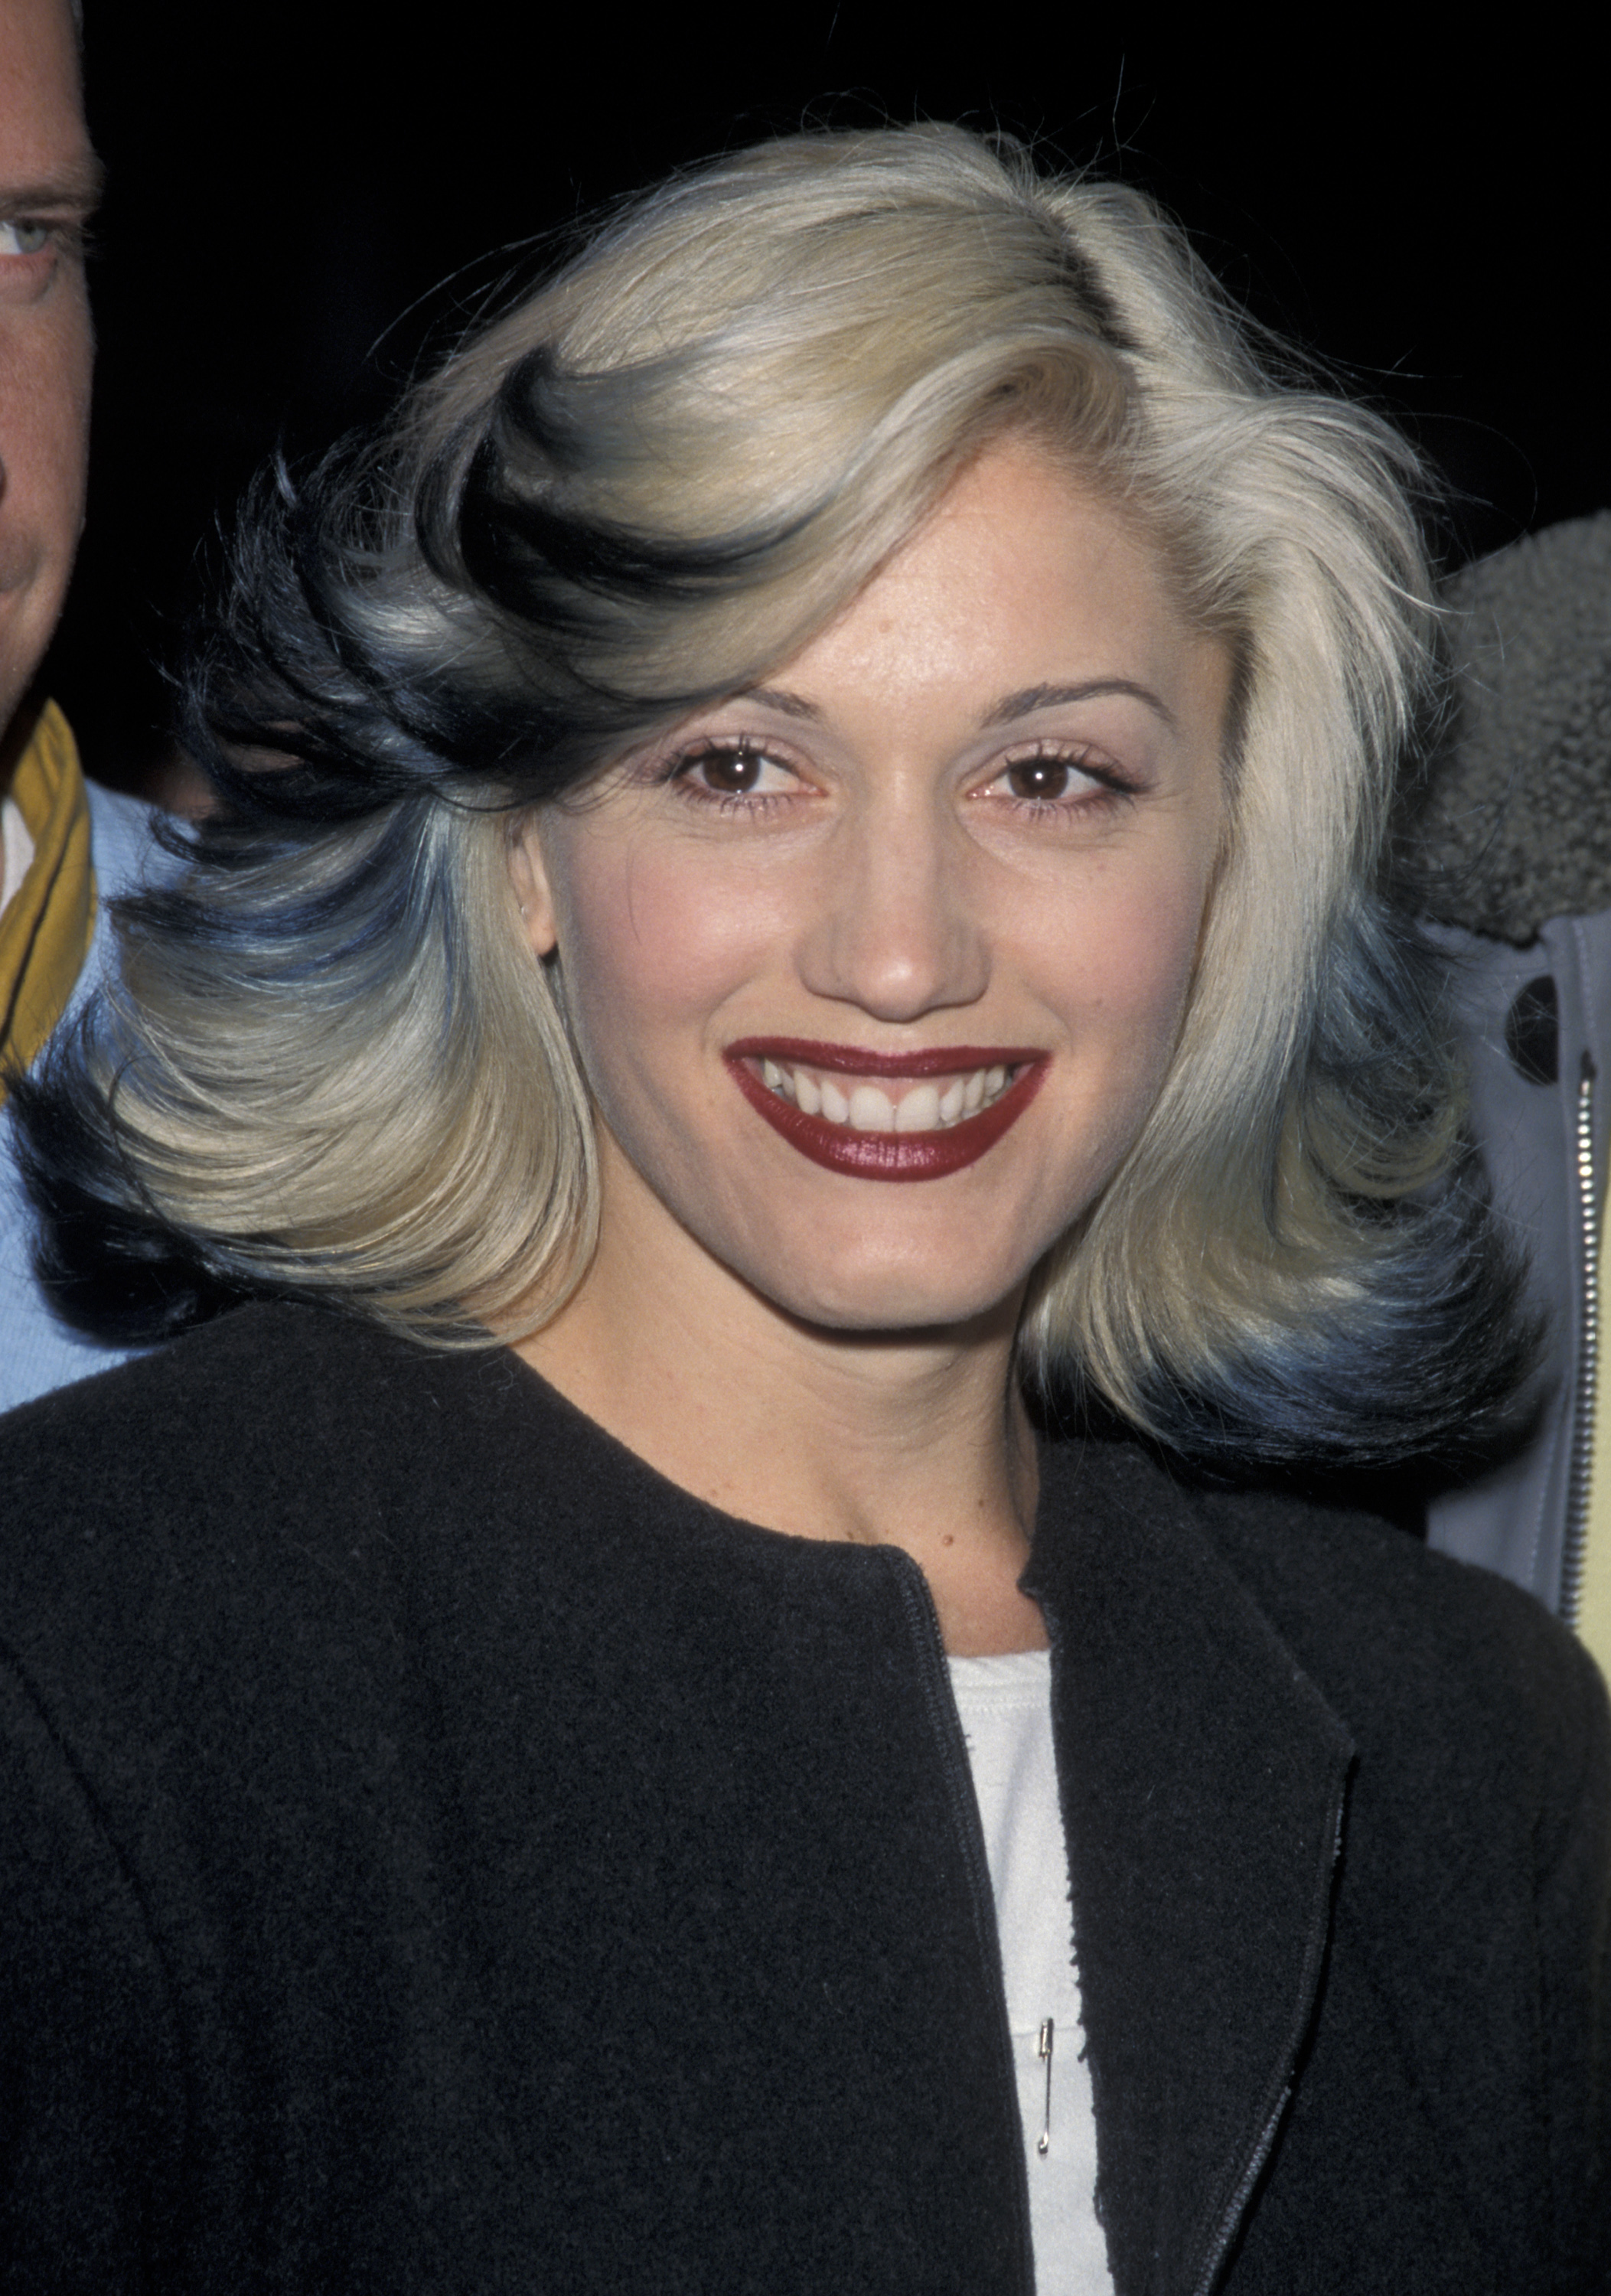 Gwen Stefani photographed in 1999 | Source: Getty Images